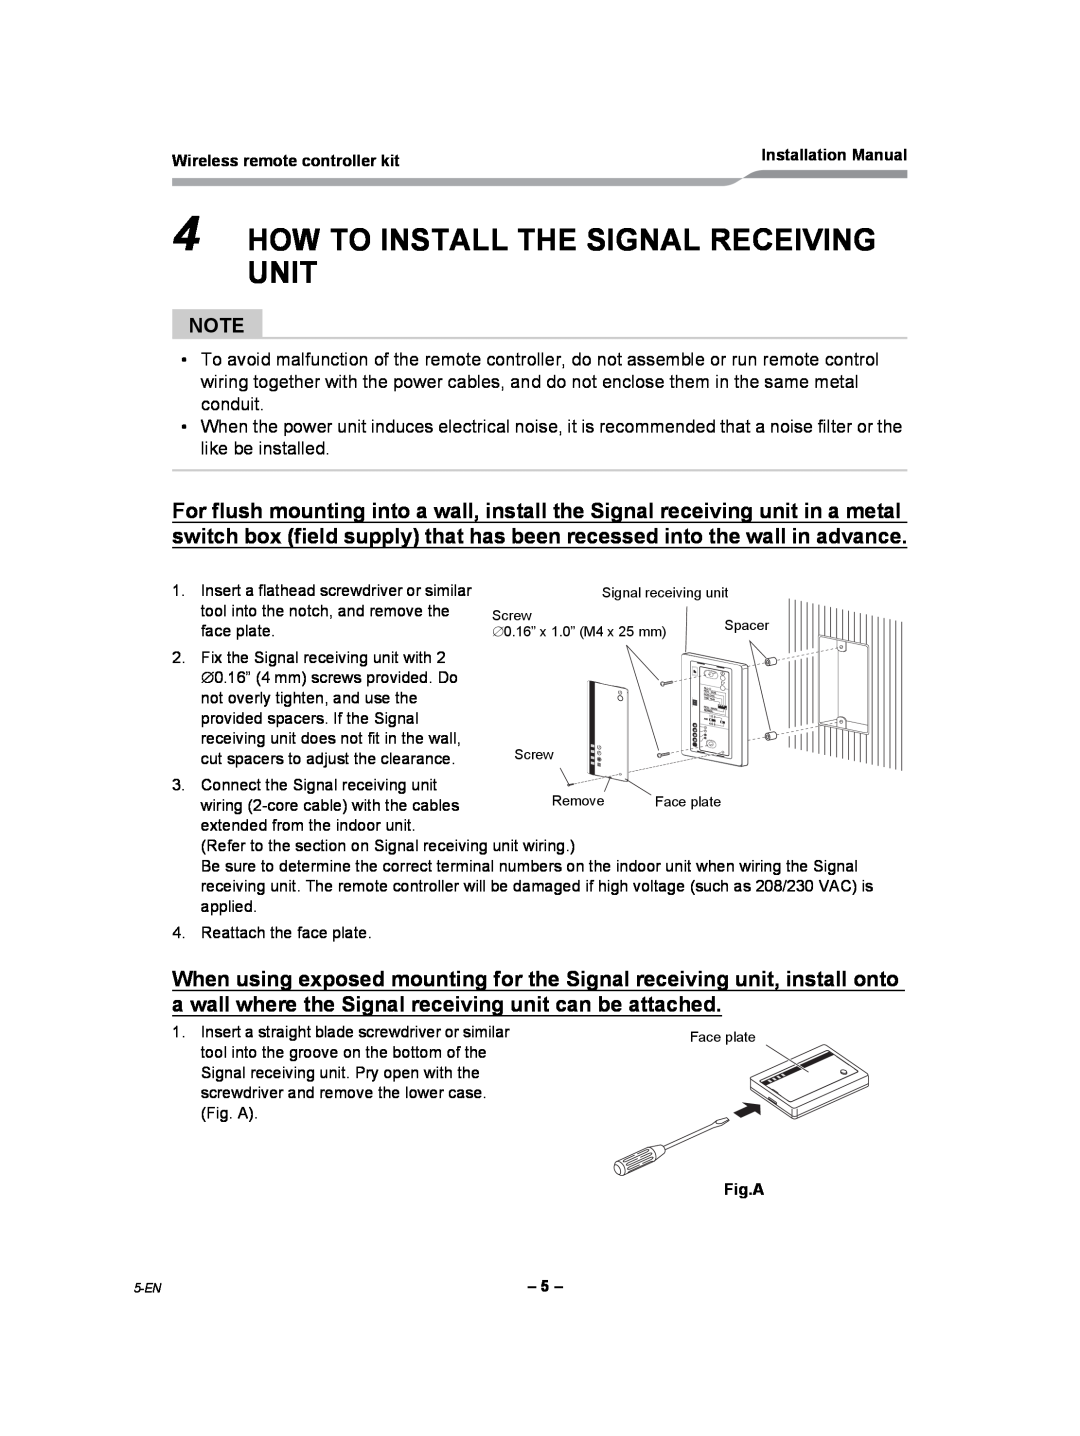 Toshiba TCB-AX21UL installation manual How To Install The Signal Receiving Unit 